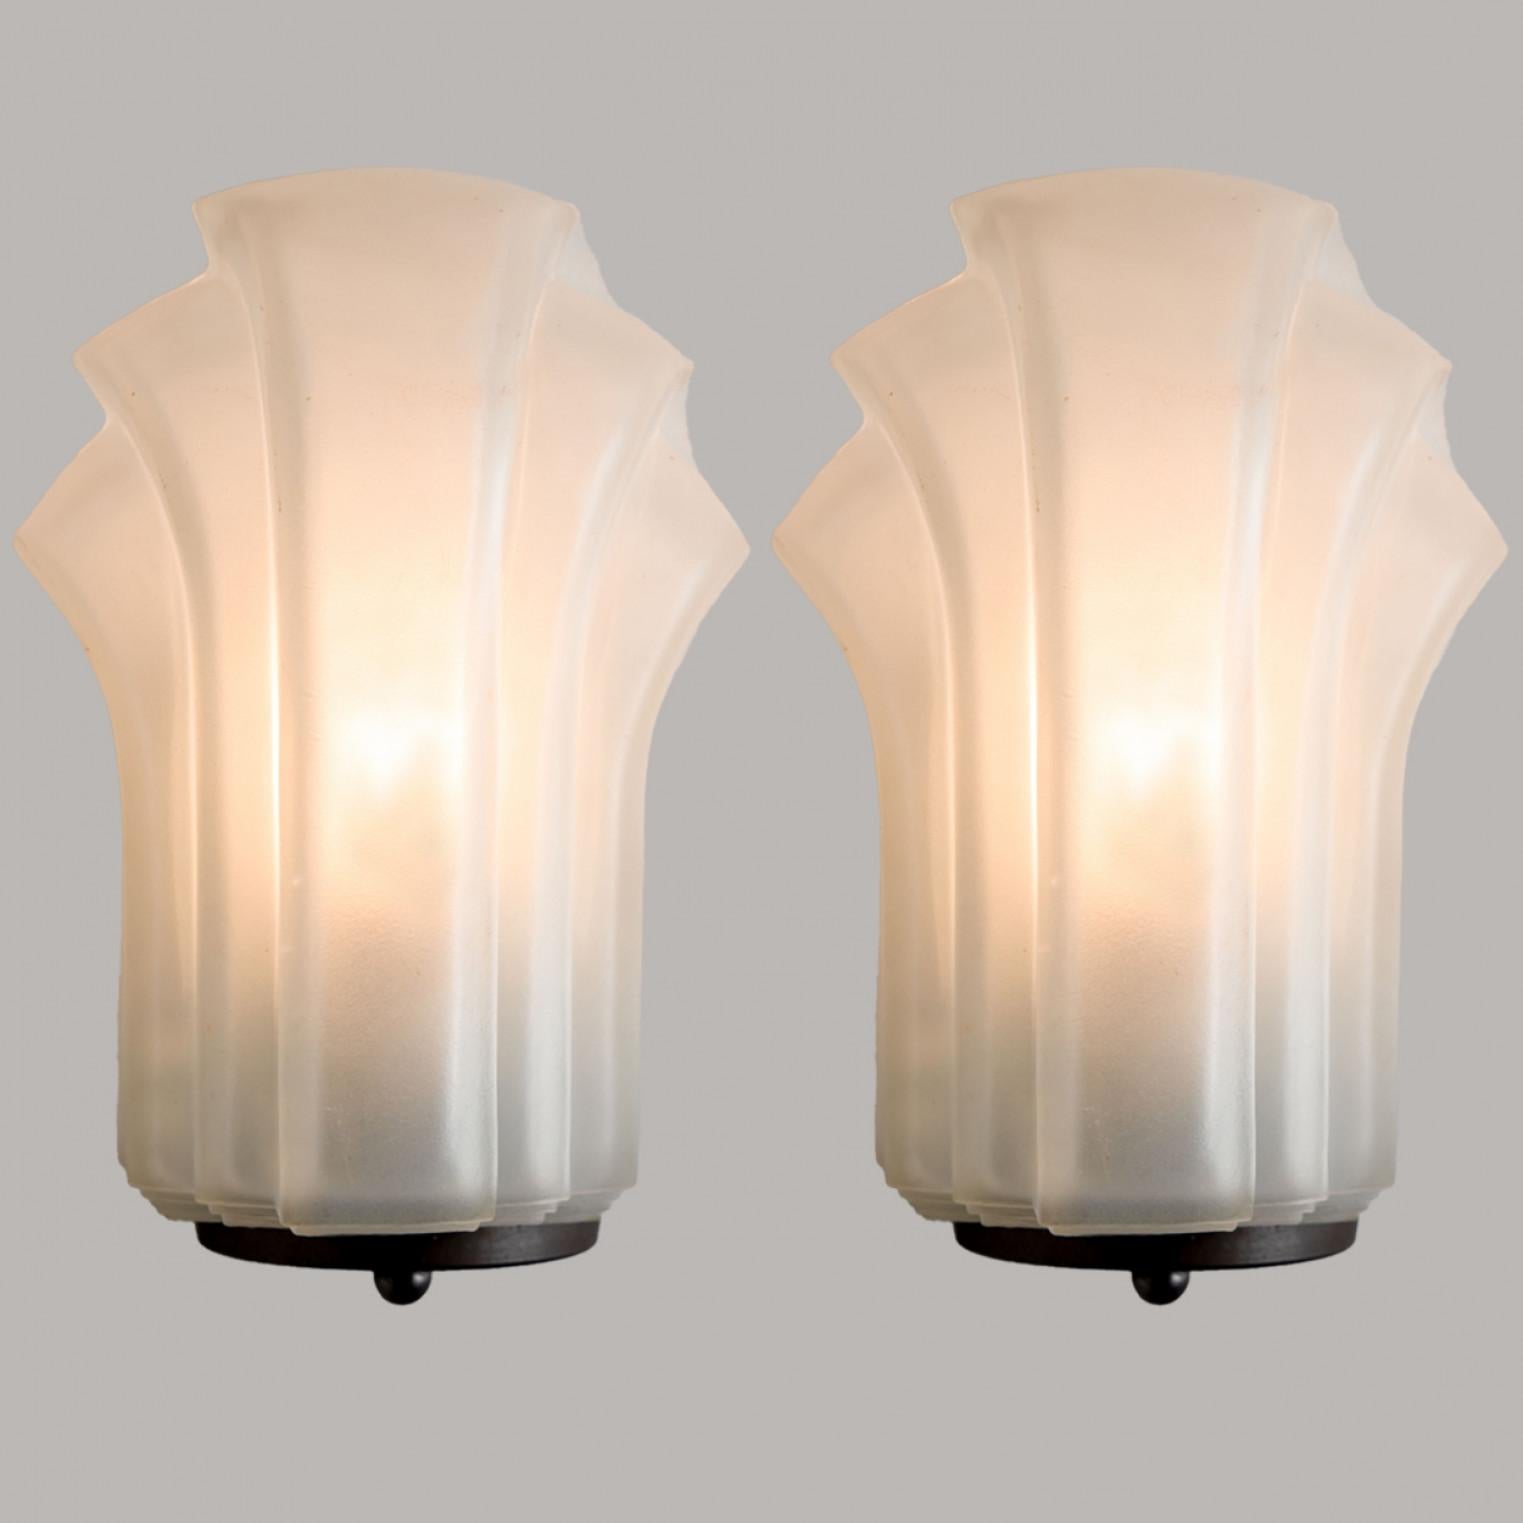 20th Century 1 of the 4 Pairs Art Deco Style Milk Glass Shell Wall Lights, Germany, 1970 For Sale